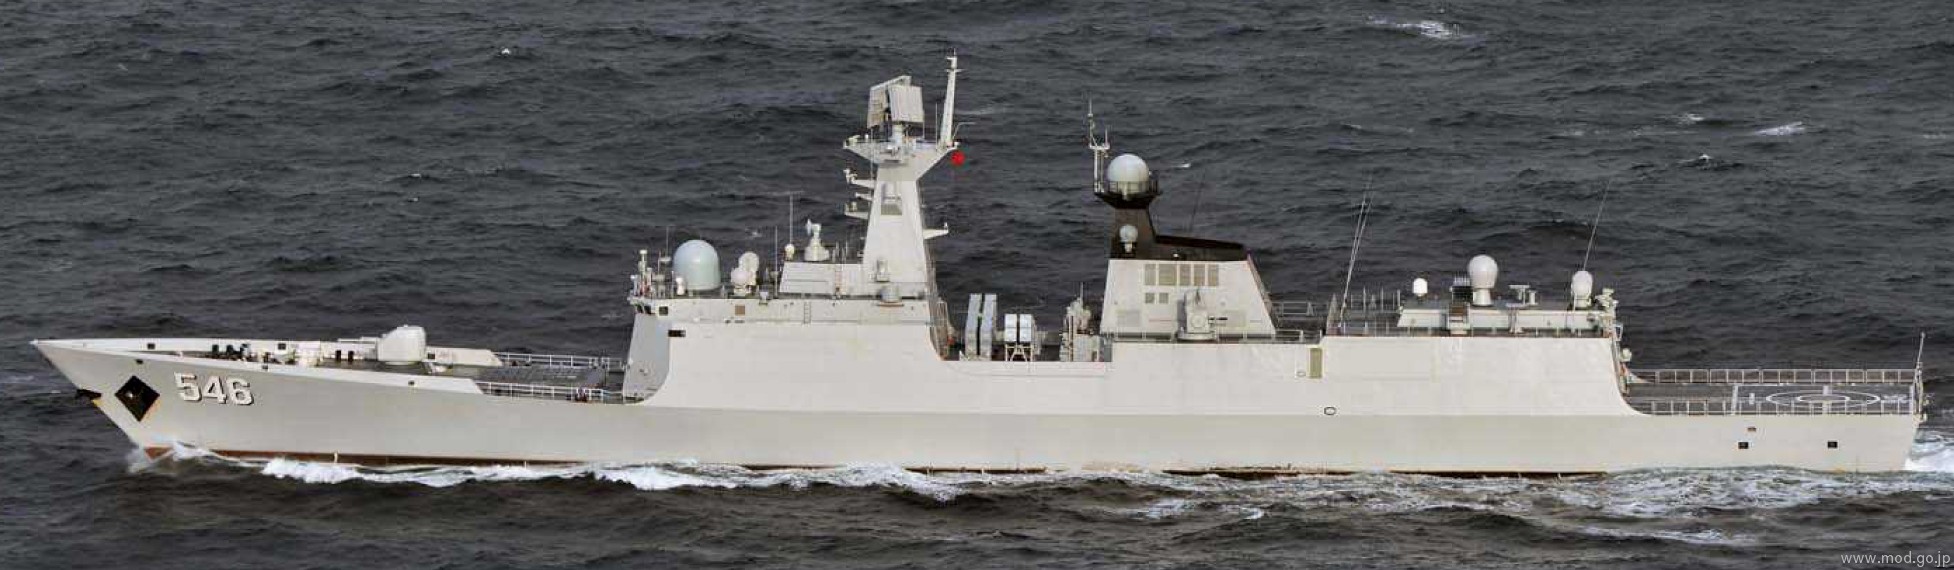 ffg-546 plans yancheng type 054a jiangkai ii class guided missile frigate china people's liberation army navy 04